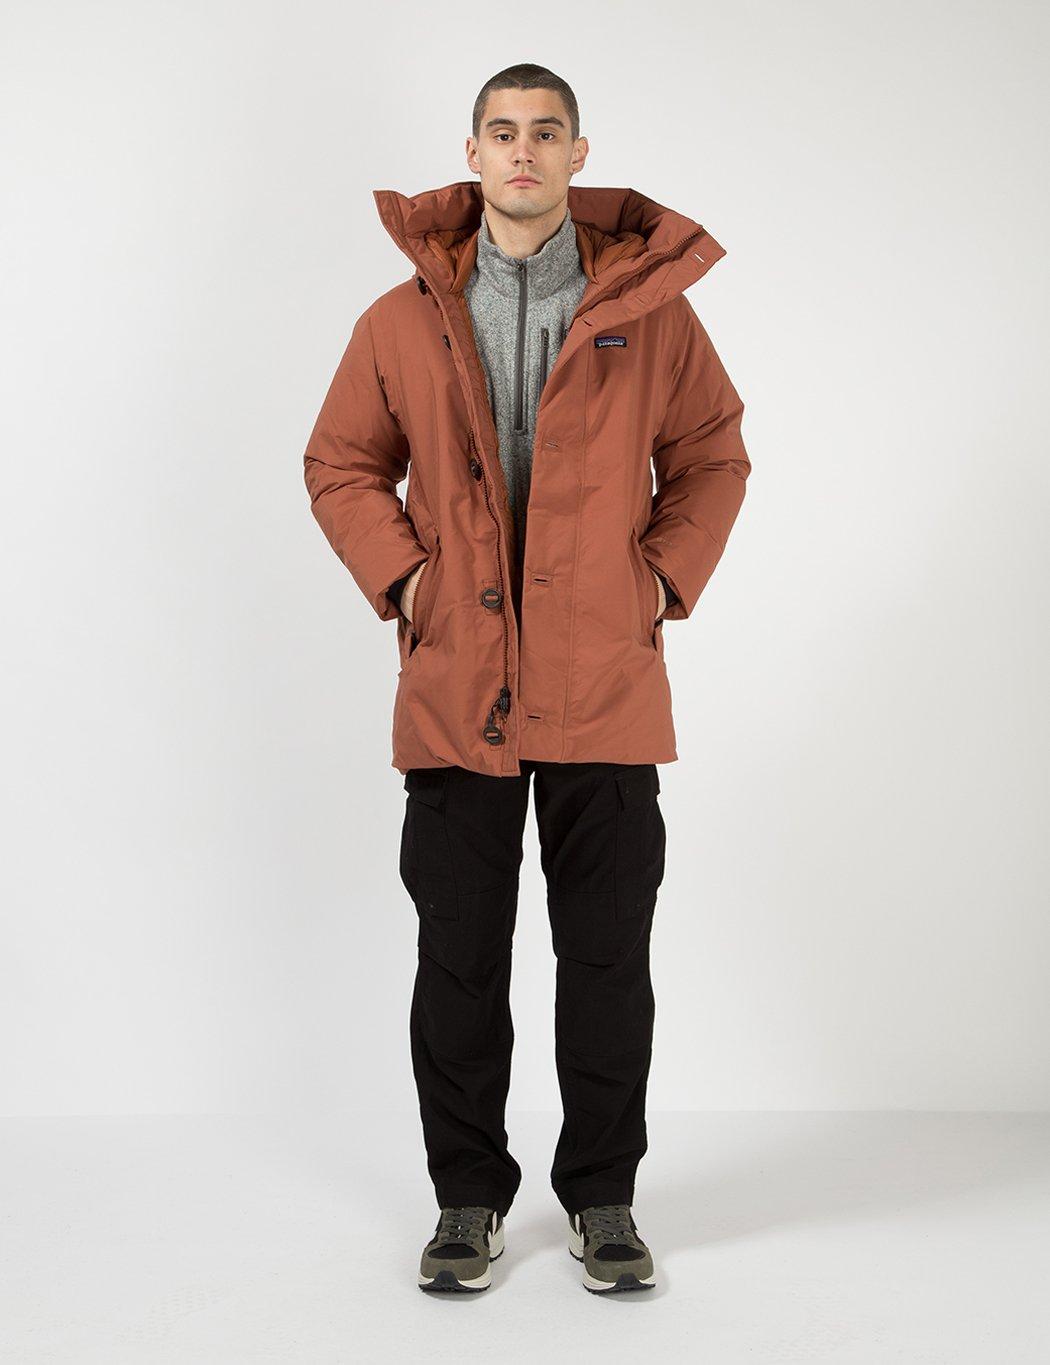 Patagonia Synthetic Frozen Range Parka in Brown for Men - Save 67% - Lyst